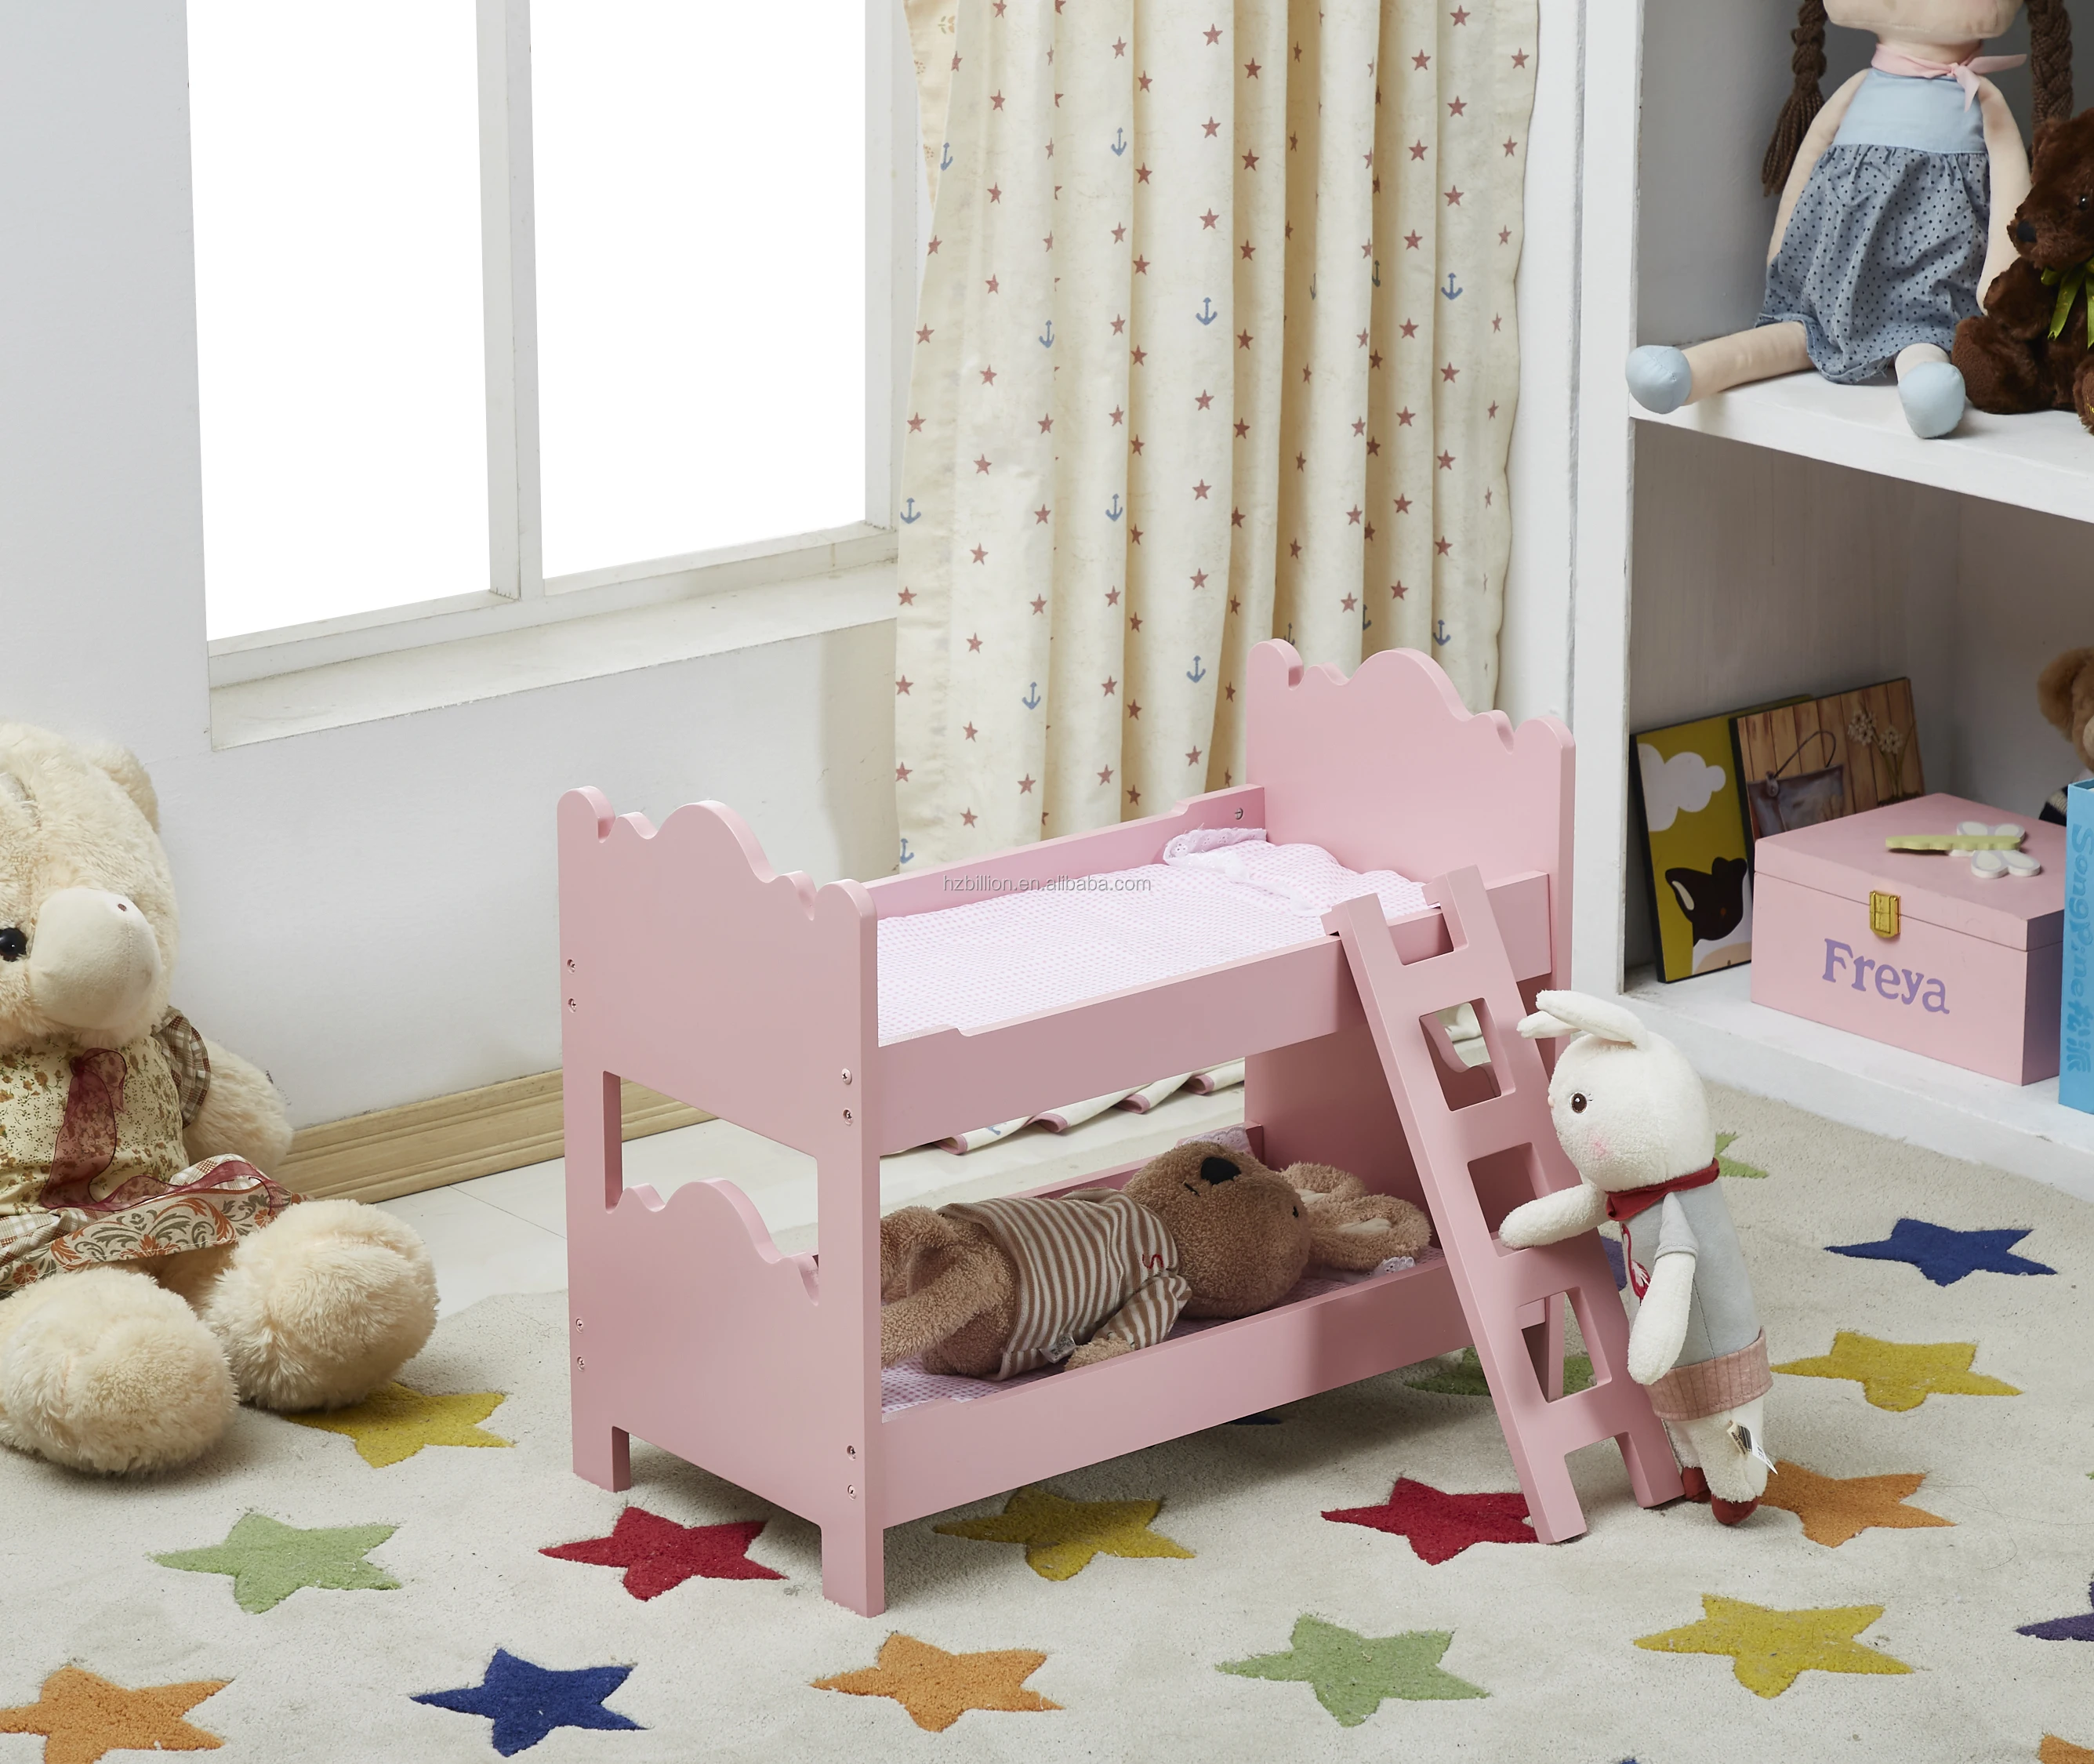 wooden doll beds for 18 inch dolls